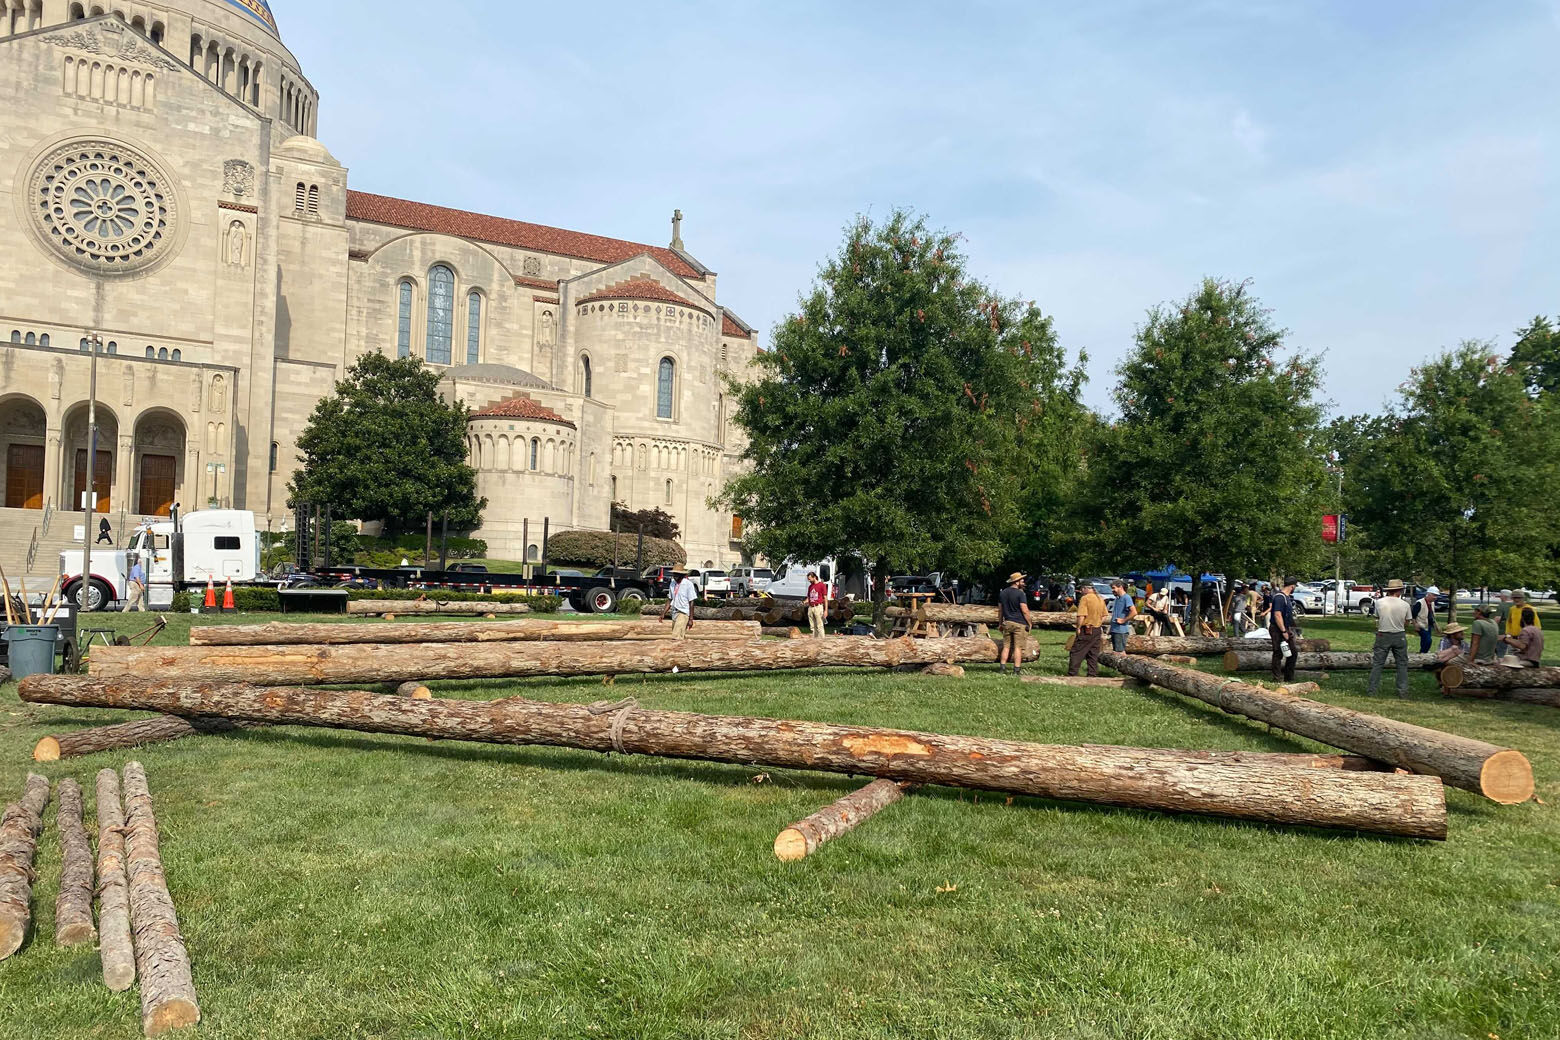 It worked 800 years ago: CUA students building replica of Notre Dame roof truss using medieval techniques